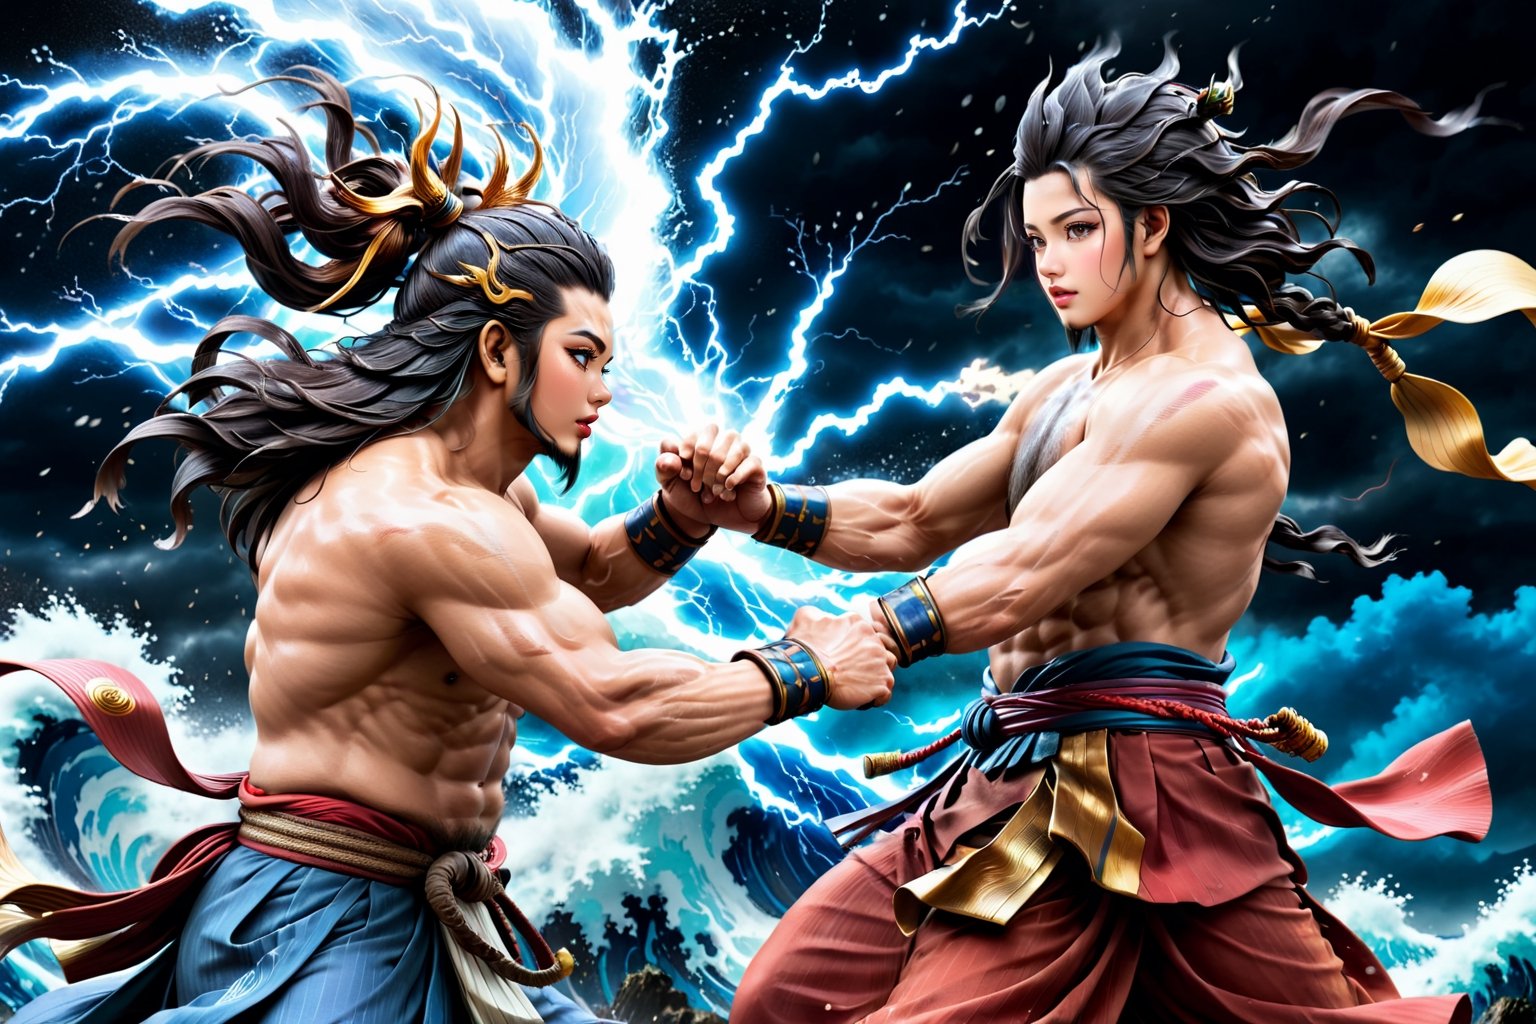  high contrast, (vibrant color:0.5), (muted colors, soothing tones:1.3), Exquisite details and textures, cinematic shot,  ultra realistic photograph , best quality, masterpiece, ancient japanese 2 gods, god of wind is fighting  against god of thunder, full body, r4w photo